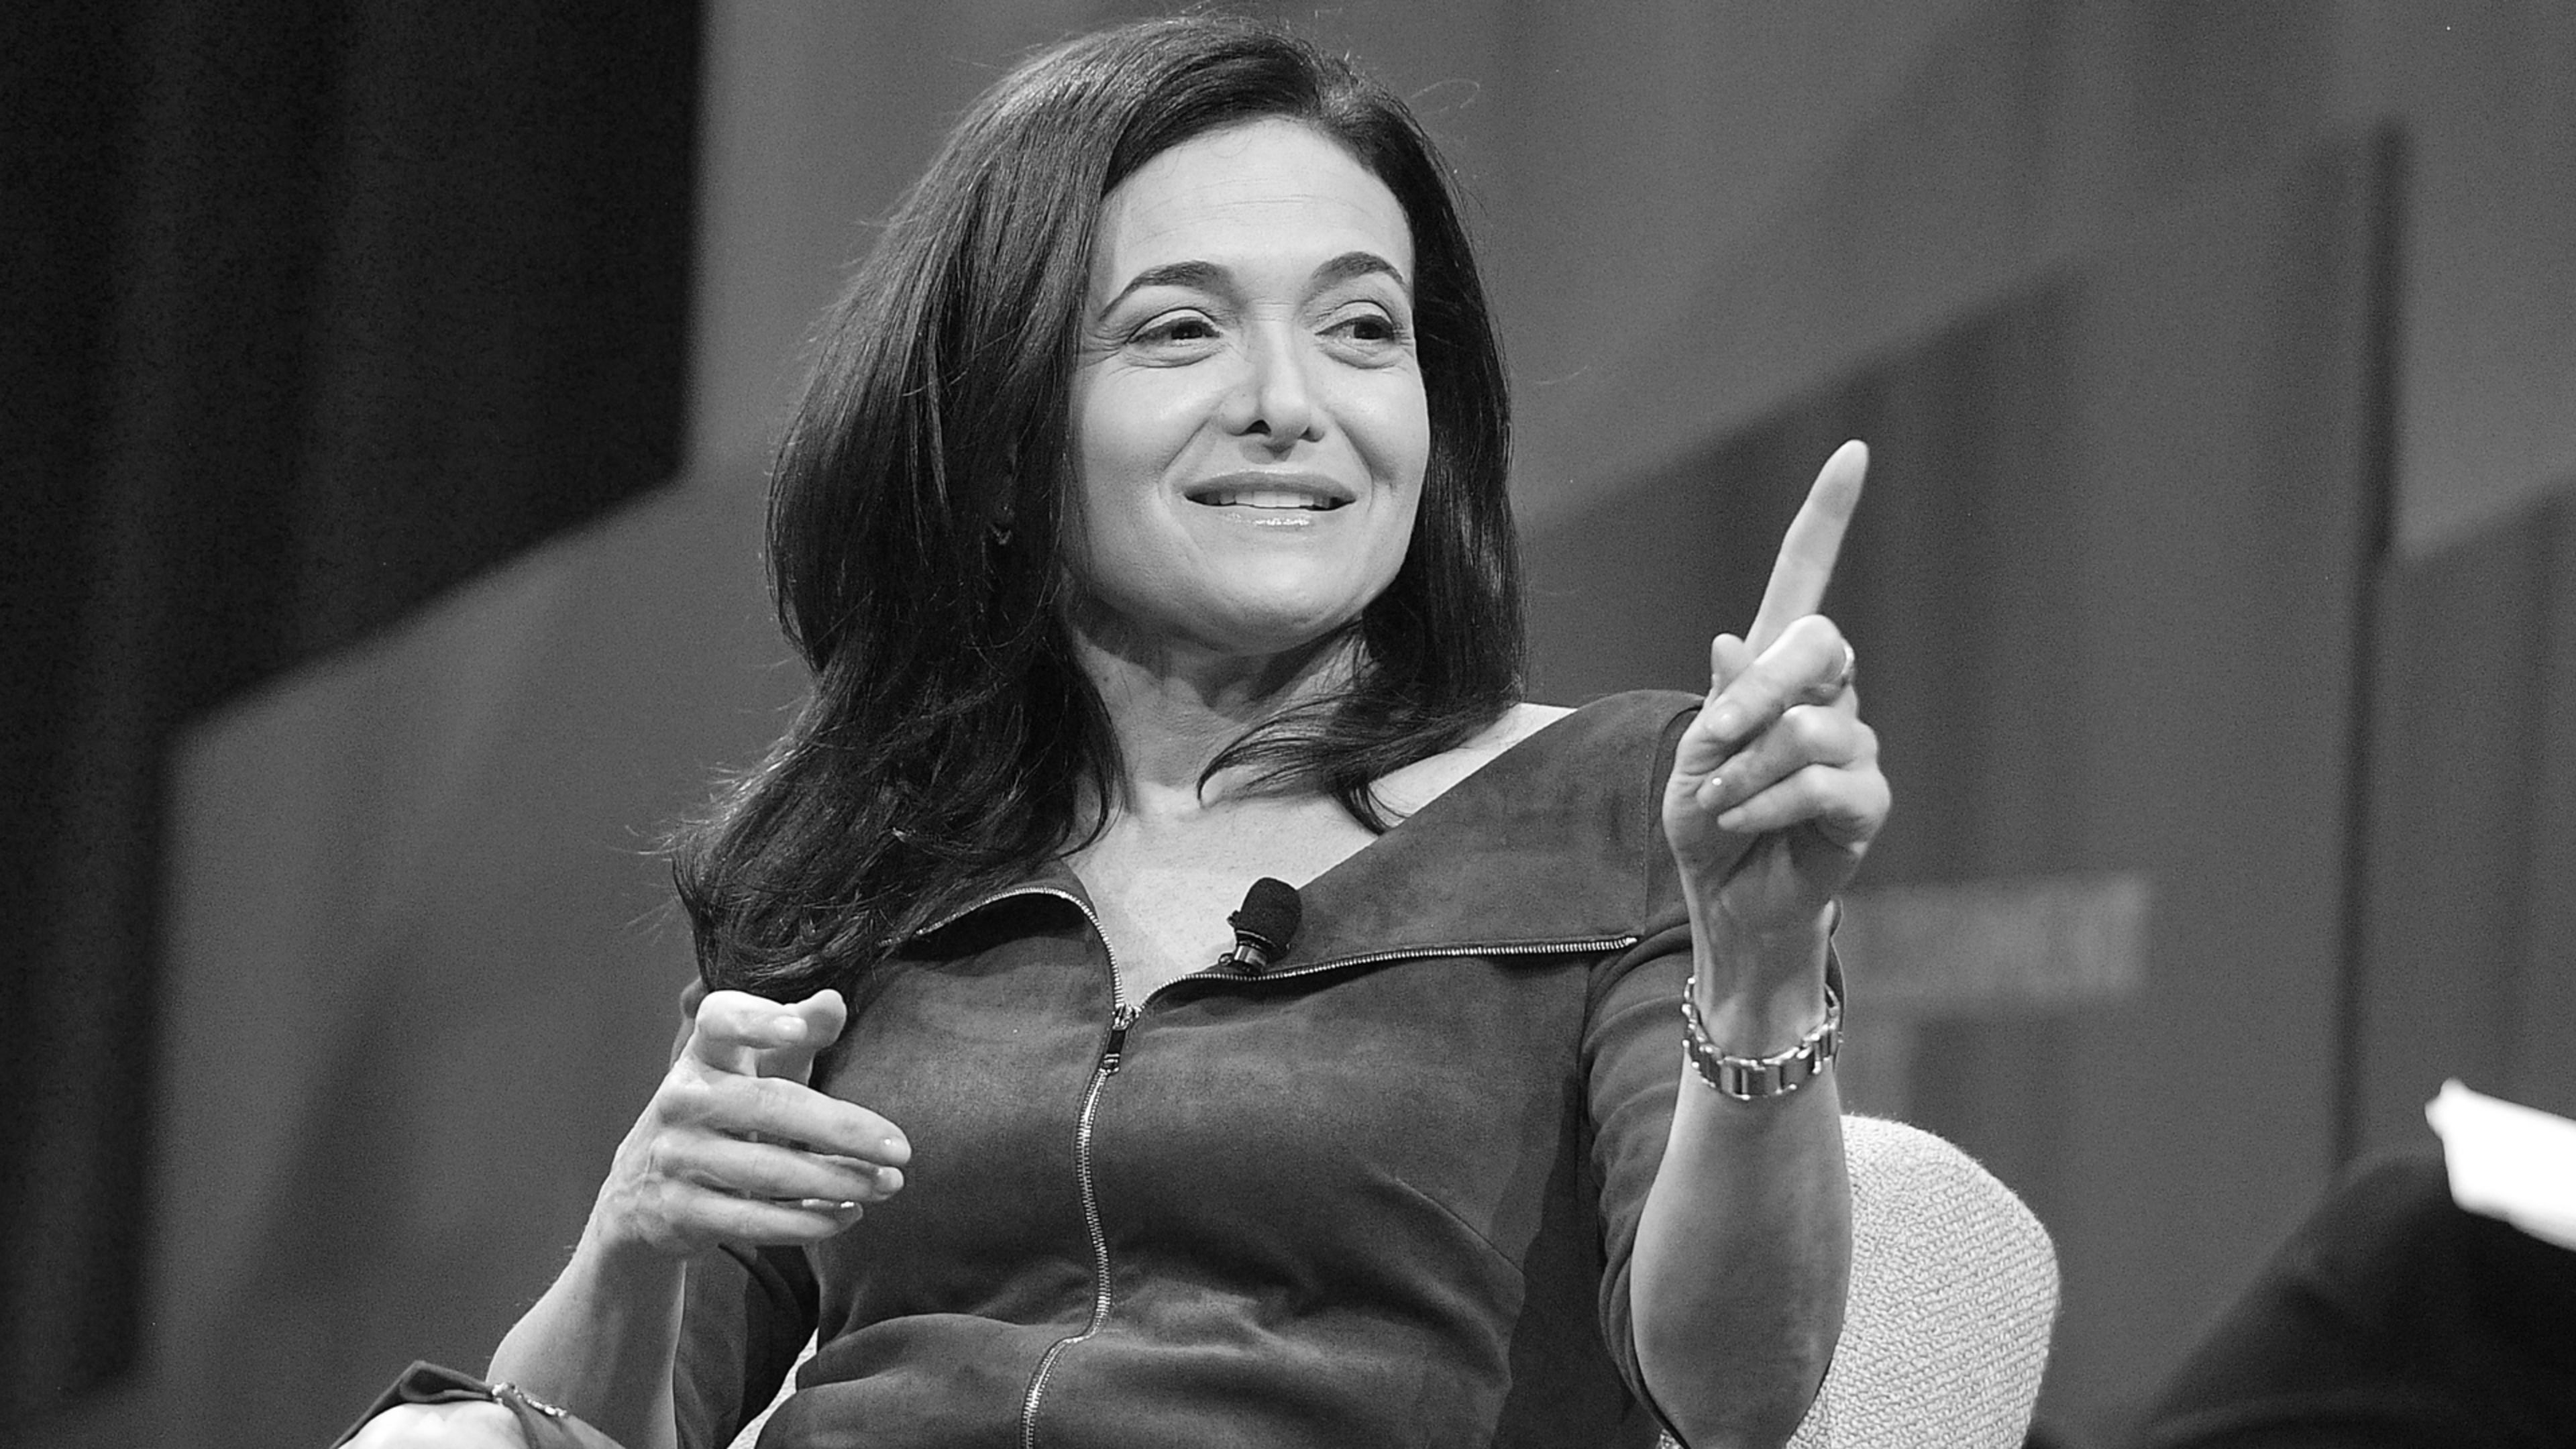 After Twitter bans political ads, Facebook’s Sheryl Sandberg says they’re ‘not worth the controversy’